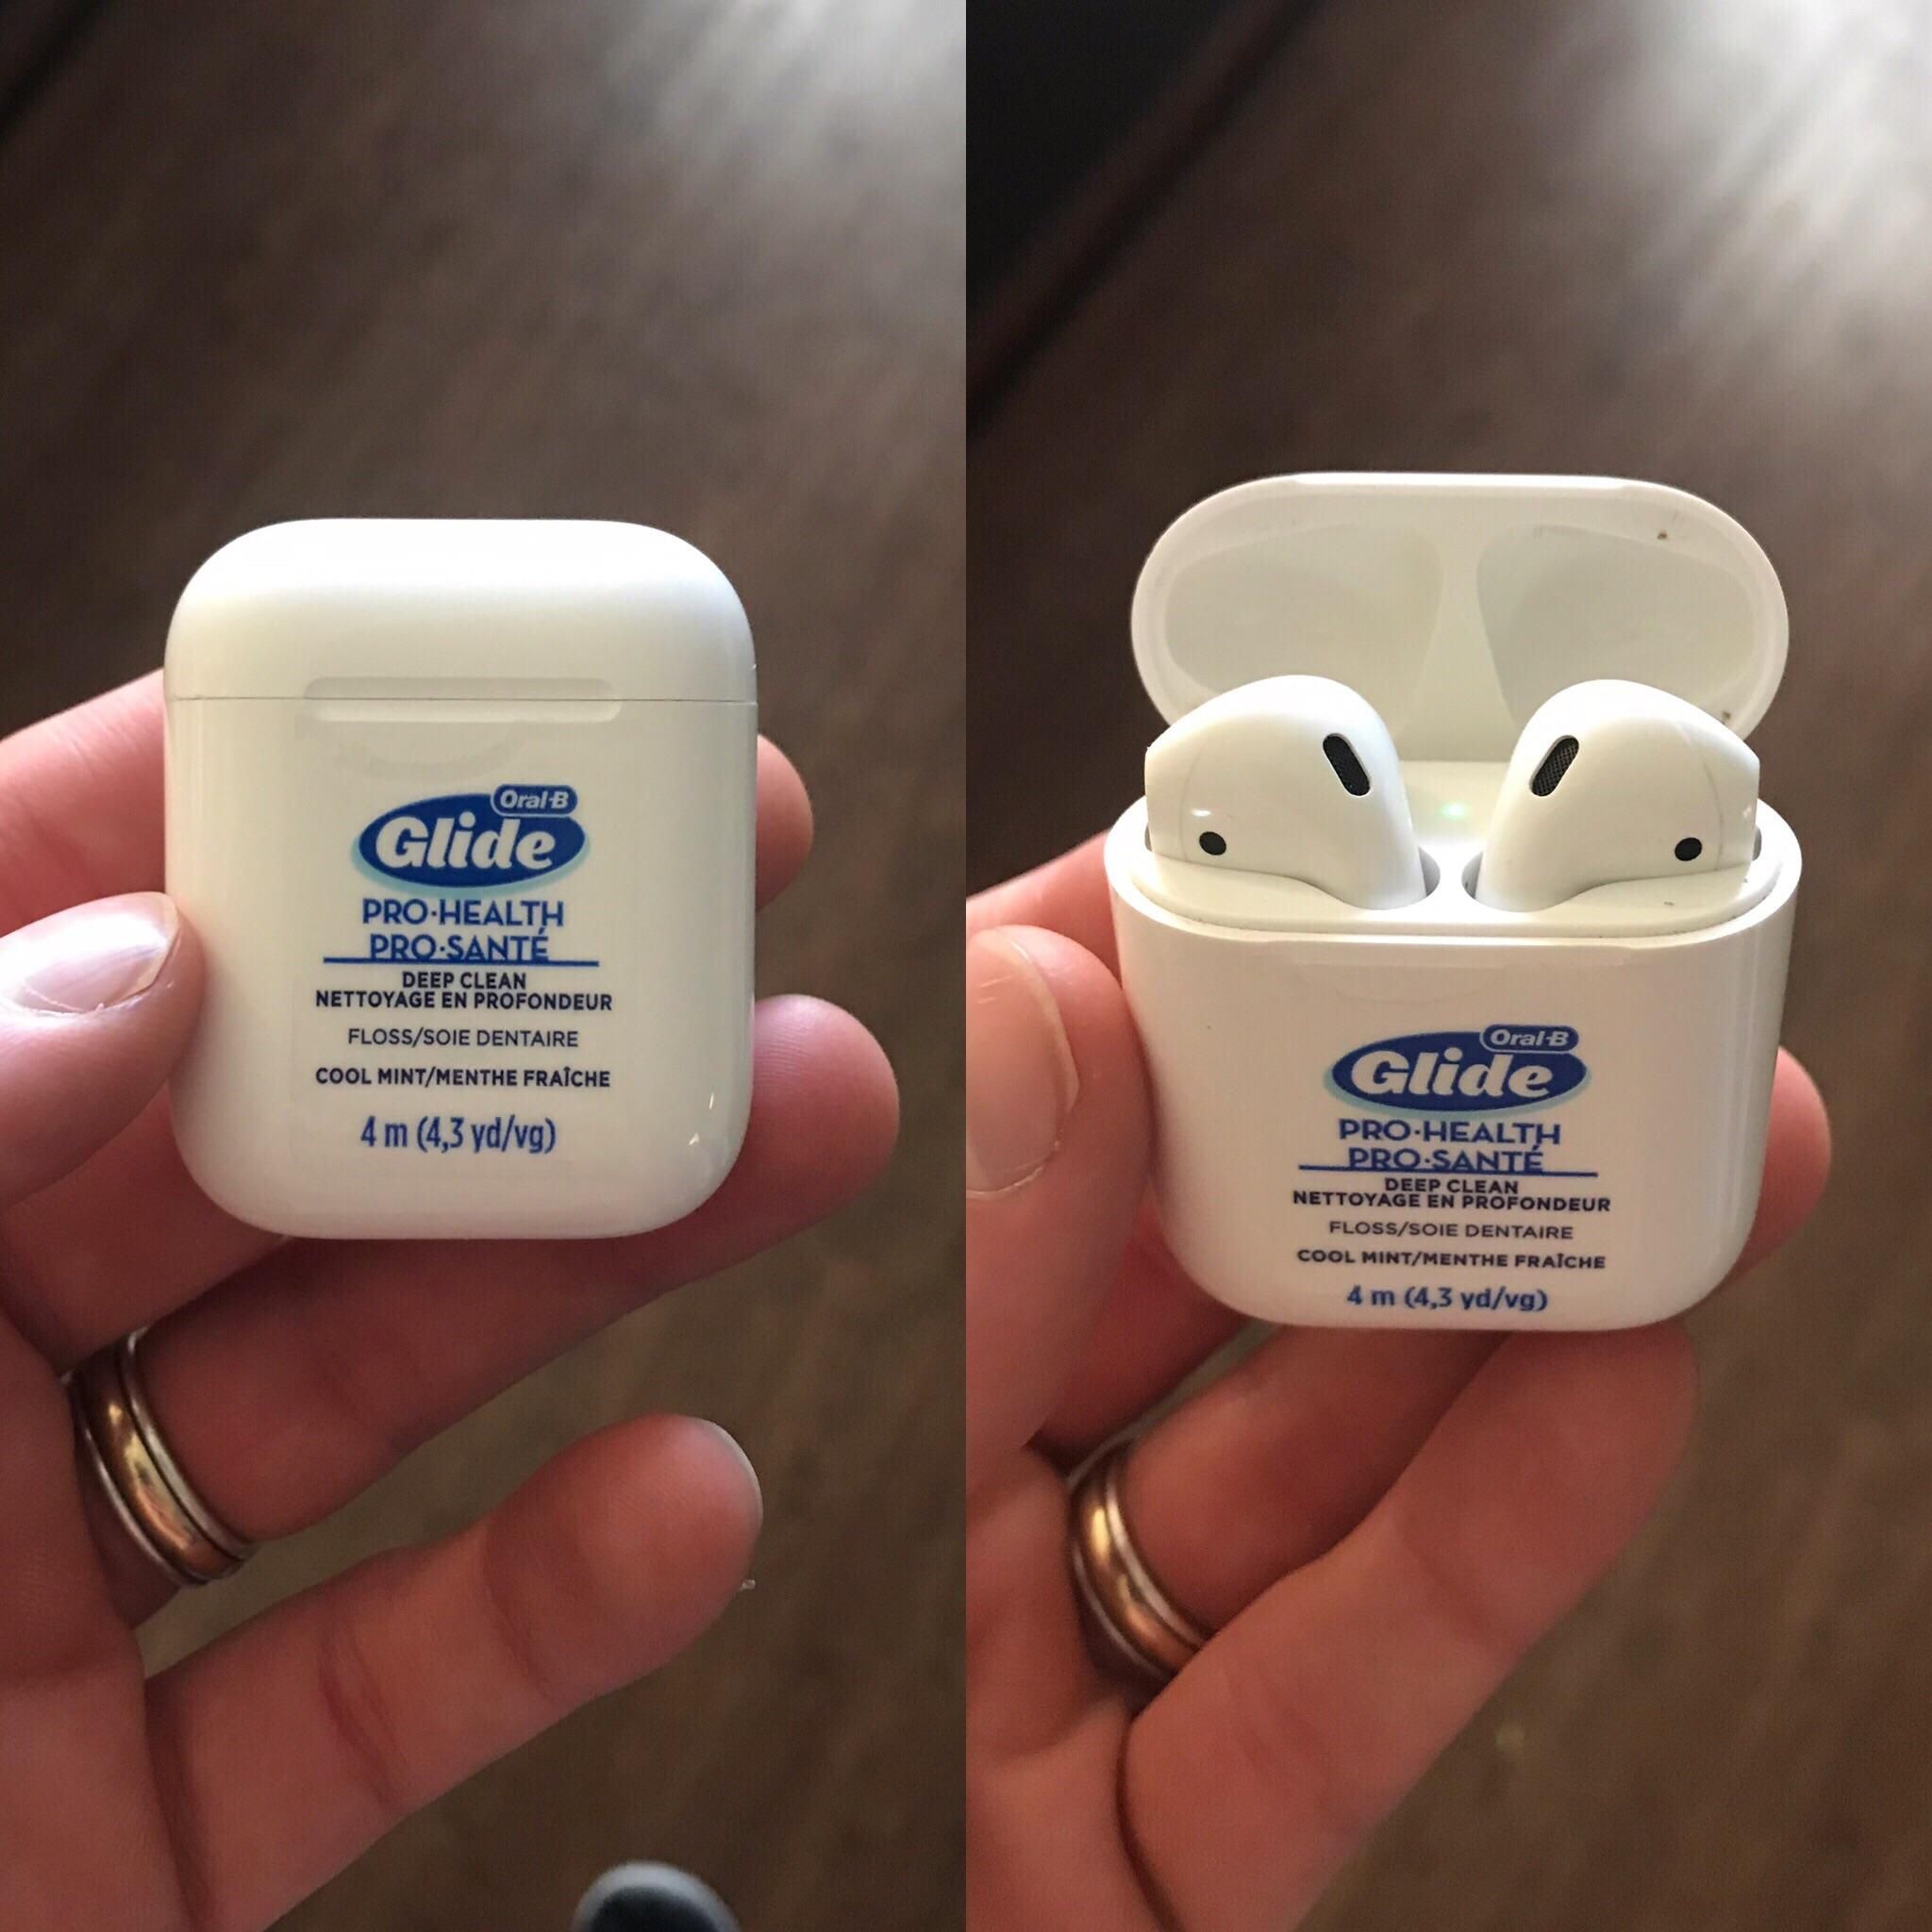 My younger sister camouflages her AirPods with a floss sticker